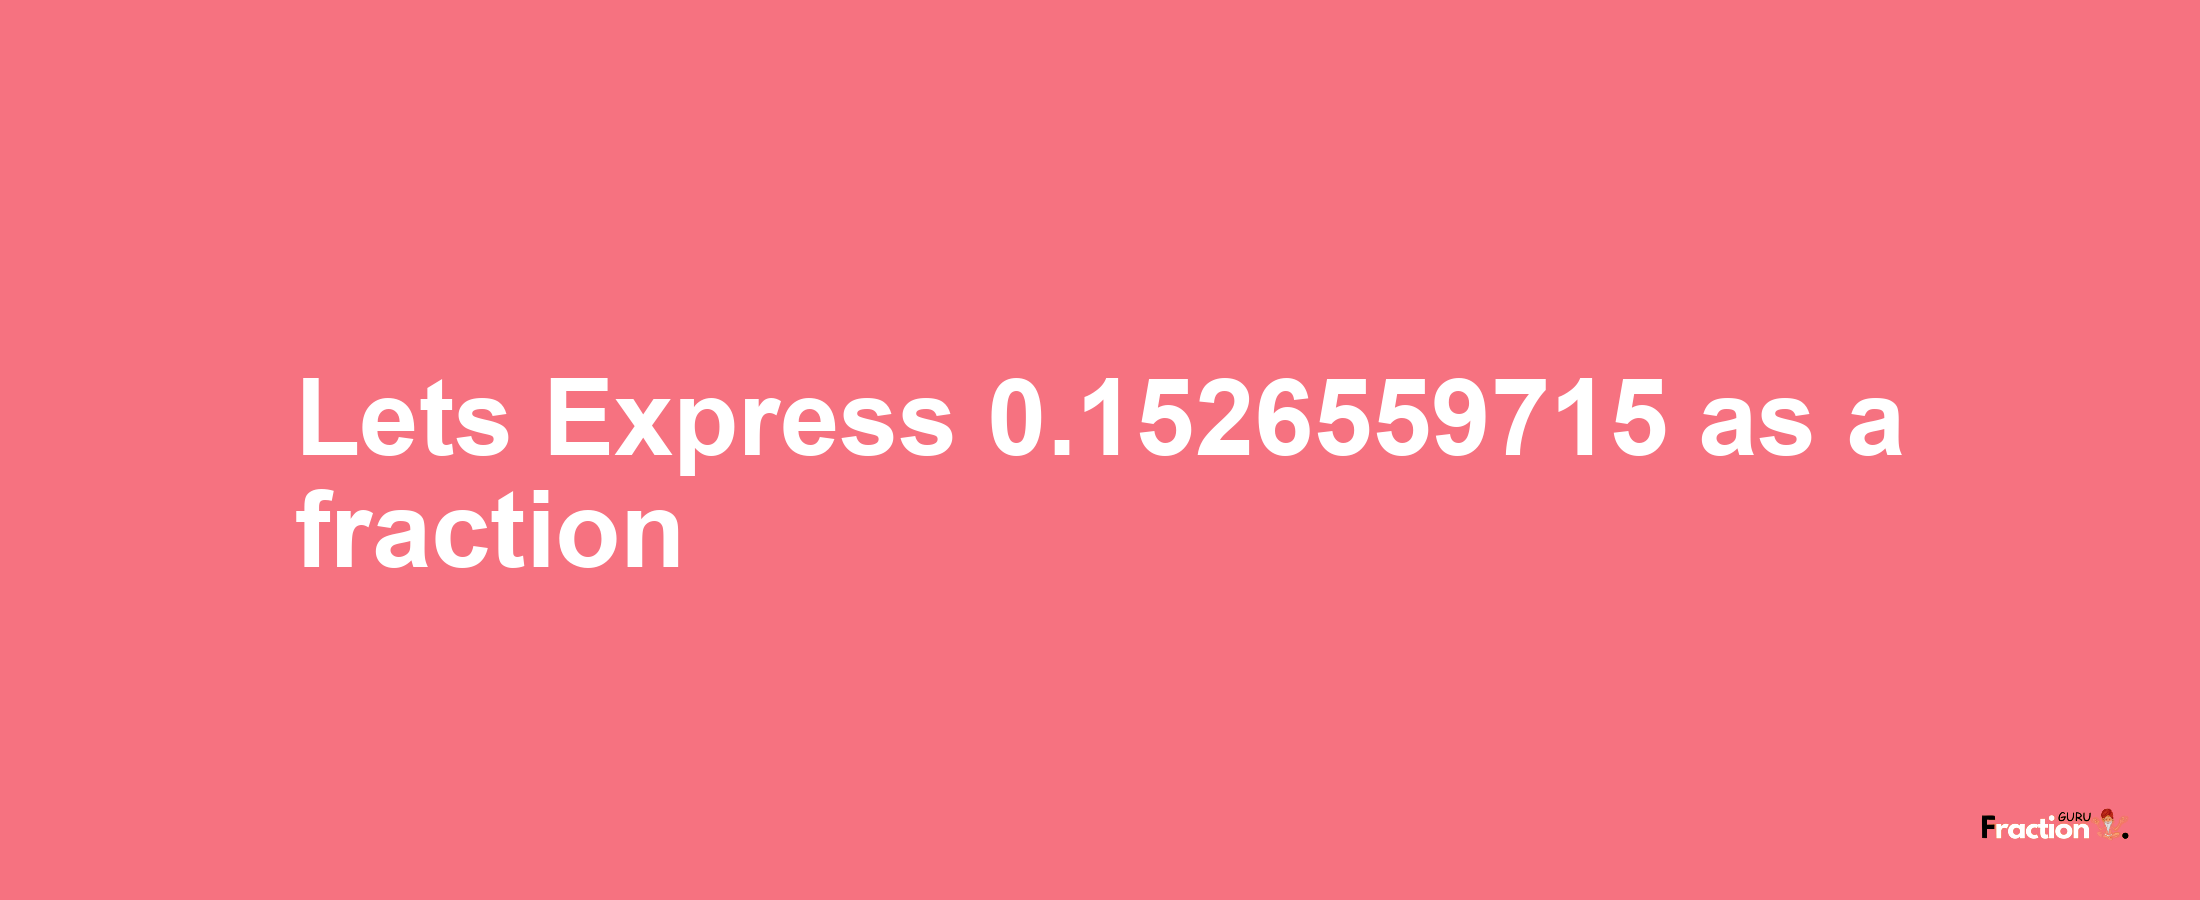 Lets Express 0.1526559715 as afraction